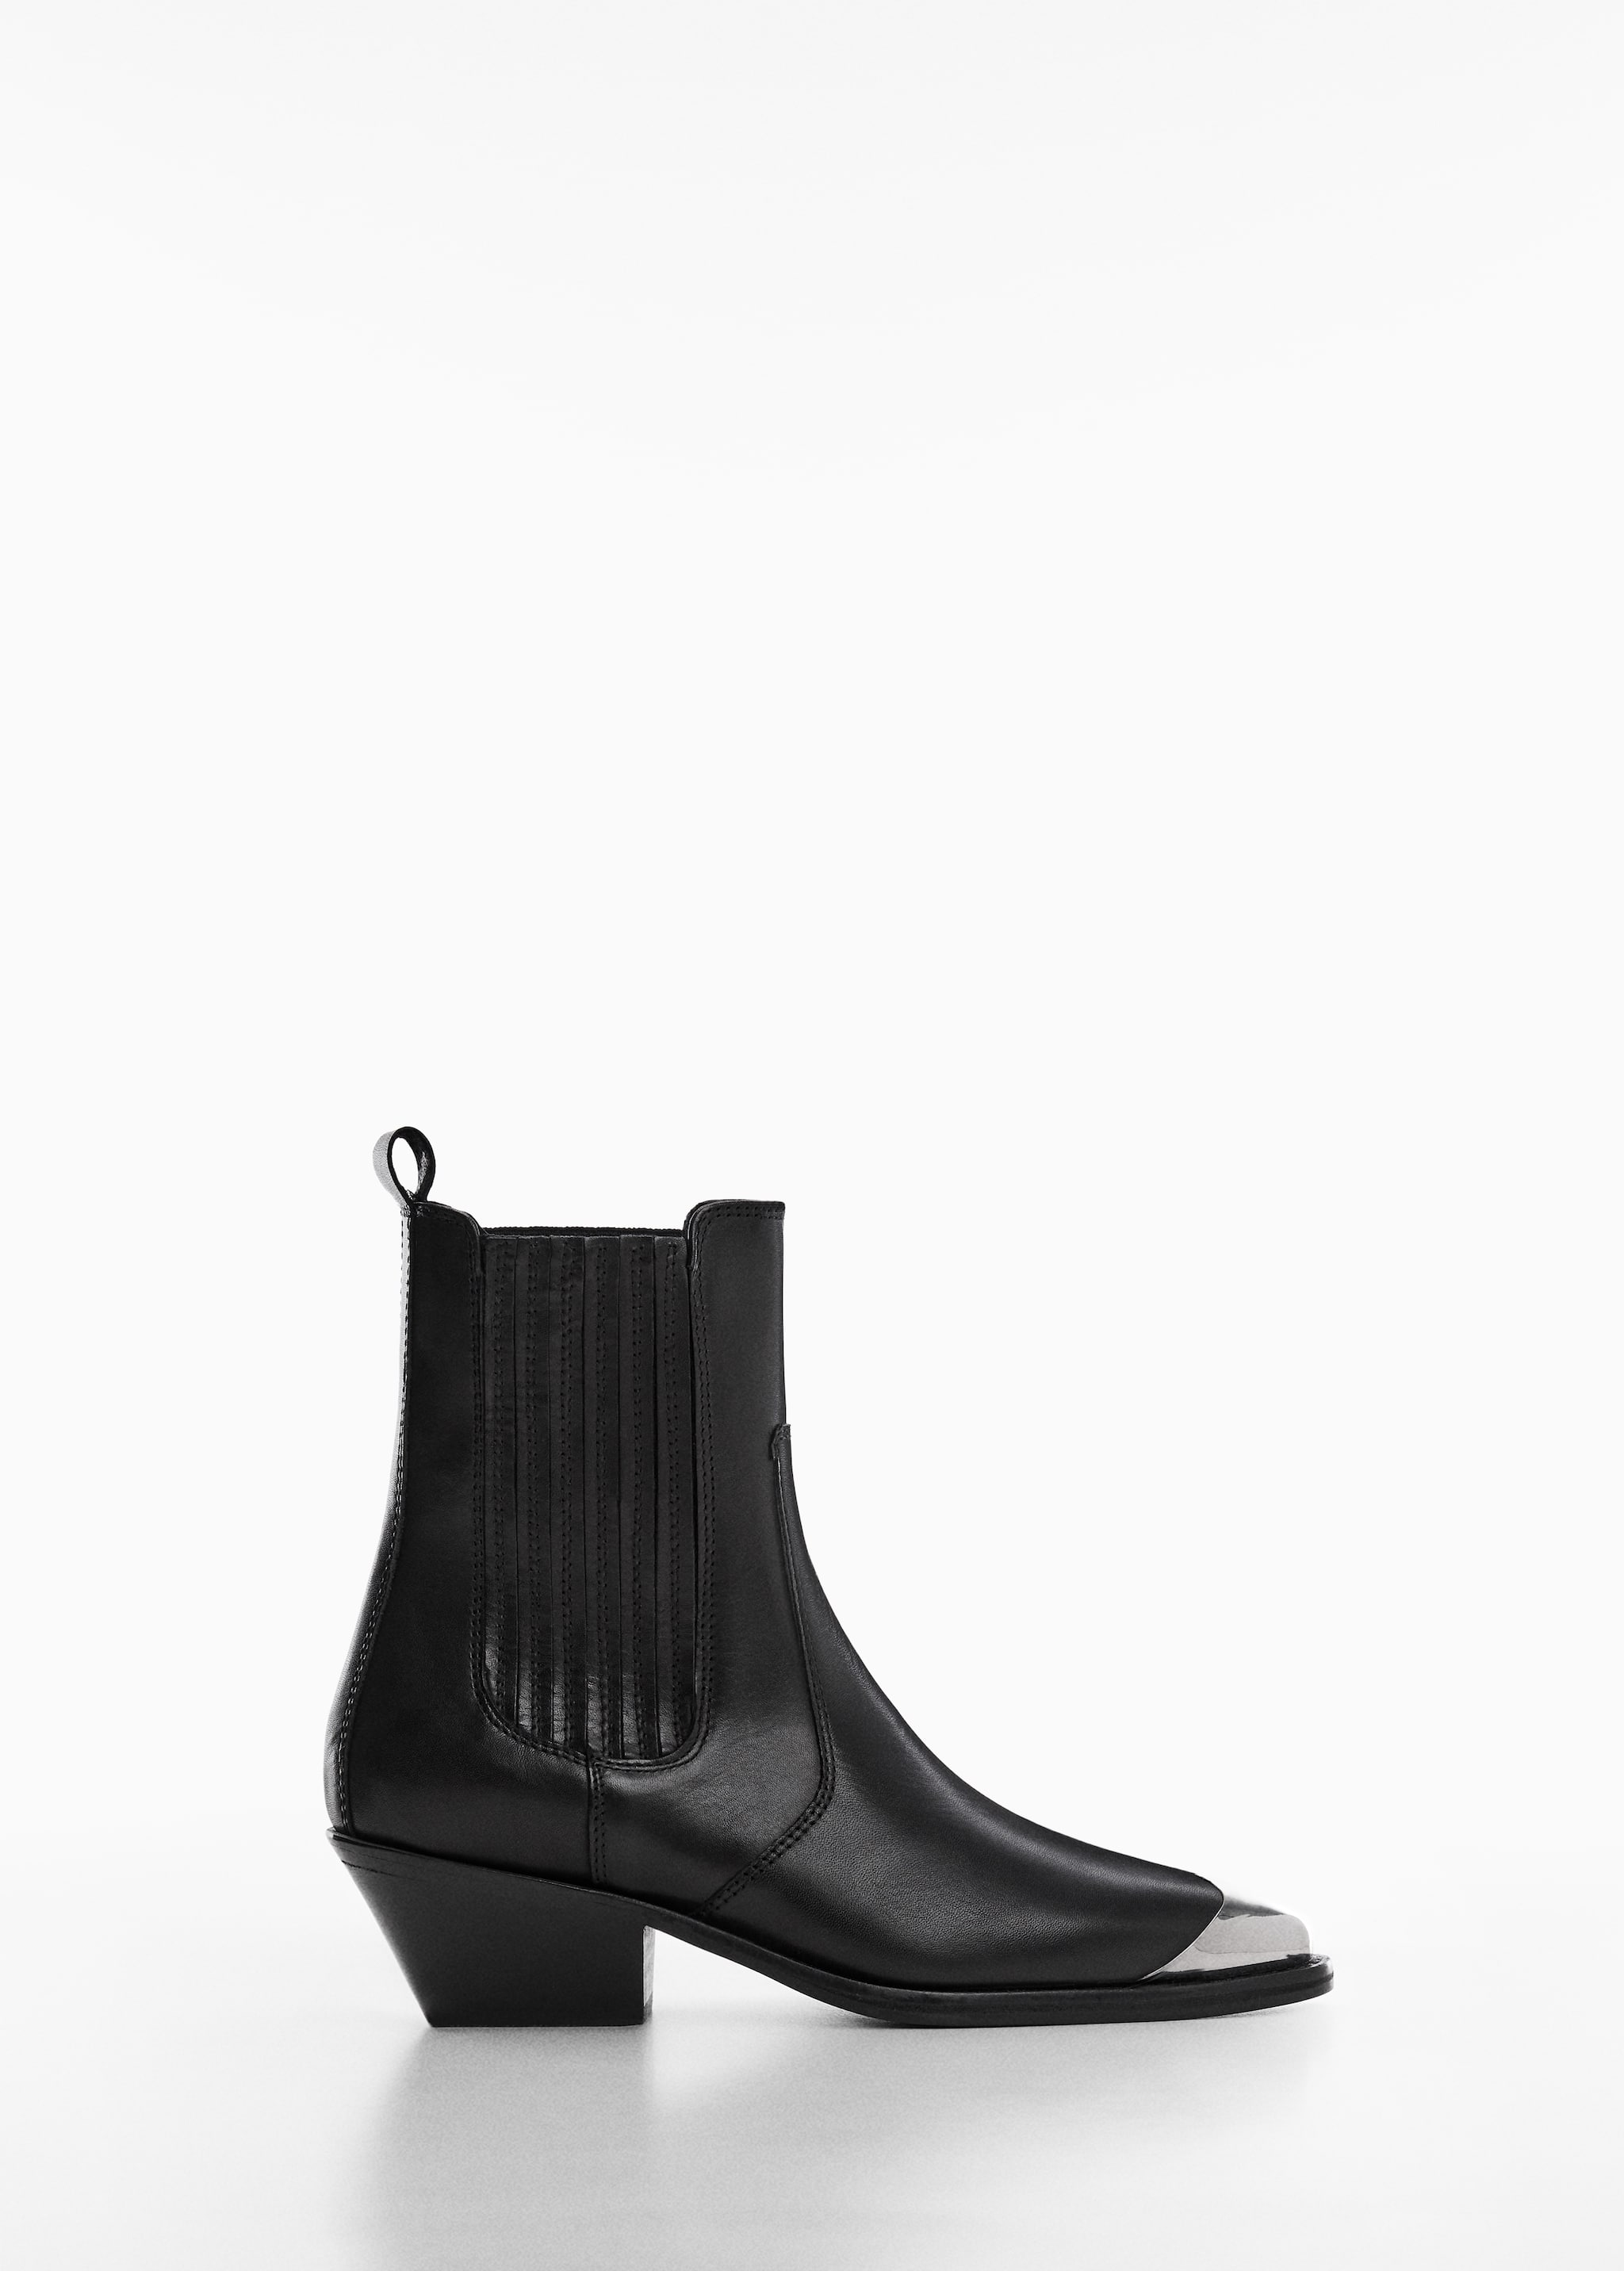 Metallic pointed toe leather ankle boots - Article without model